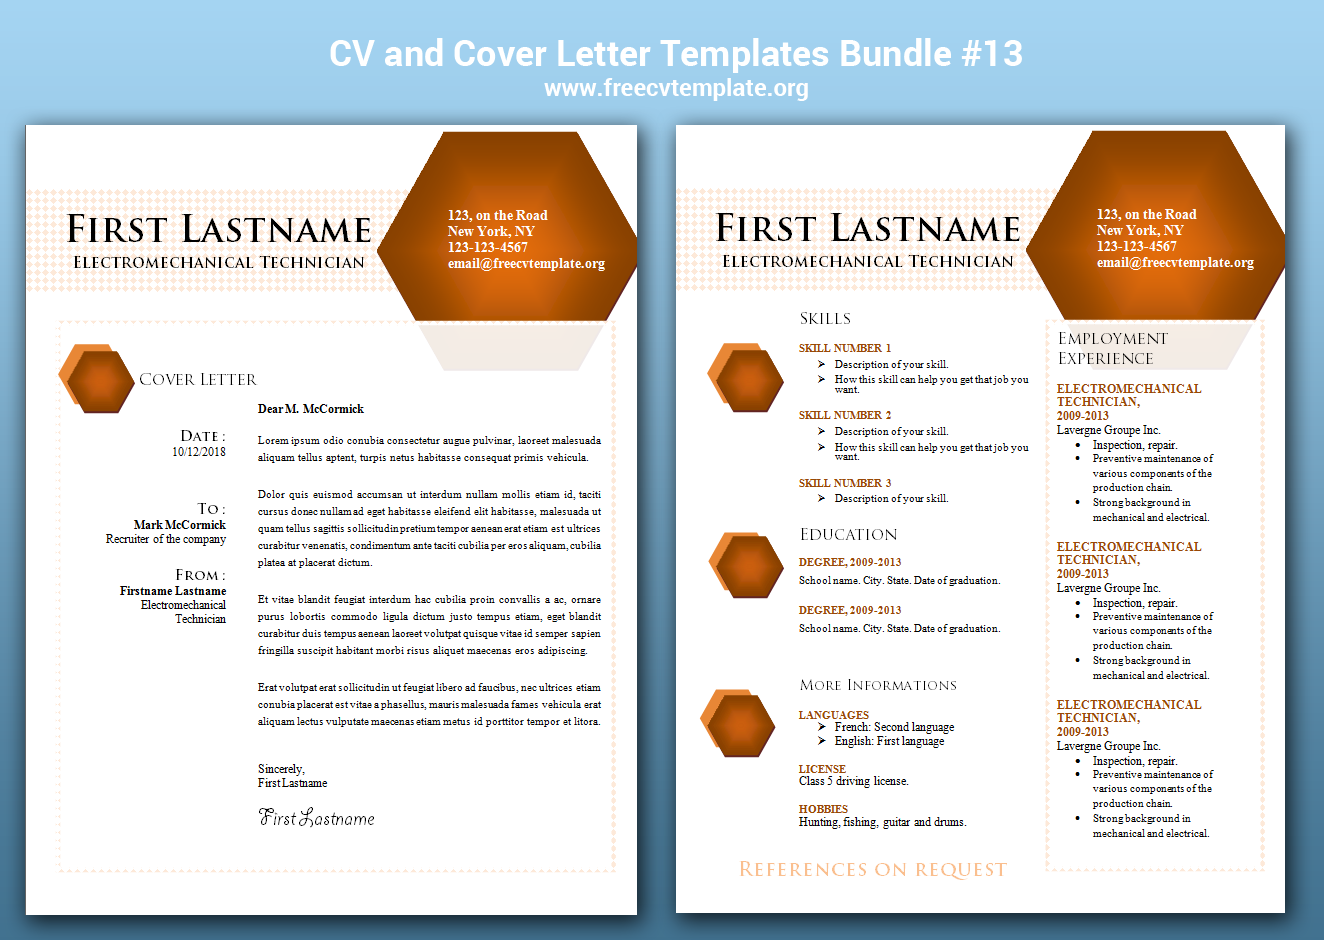 CV and Cover Letter Bundle #13